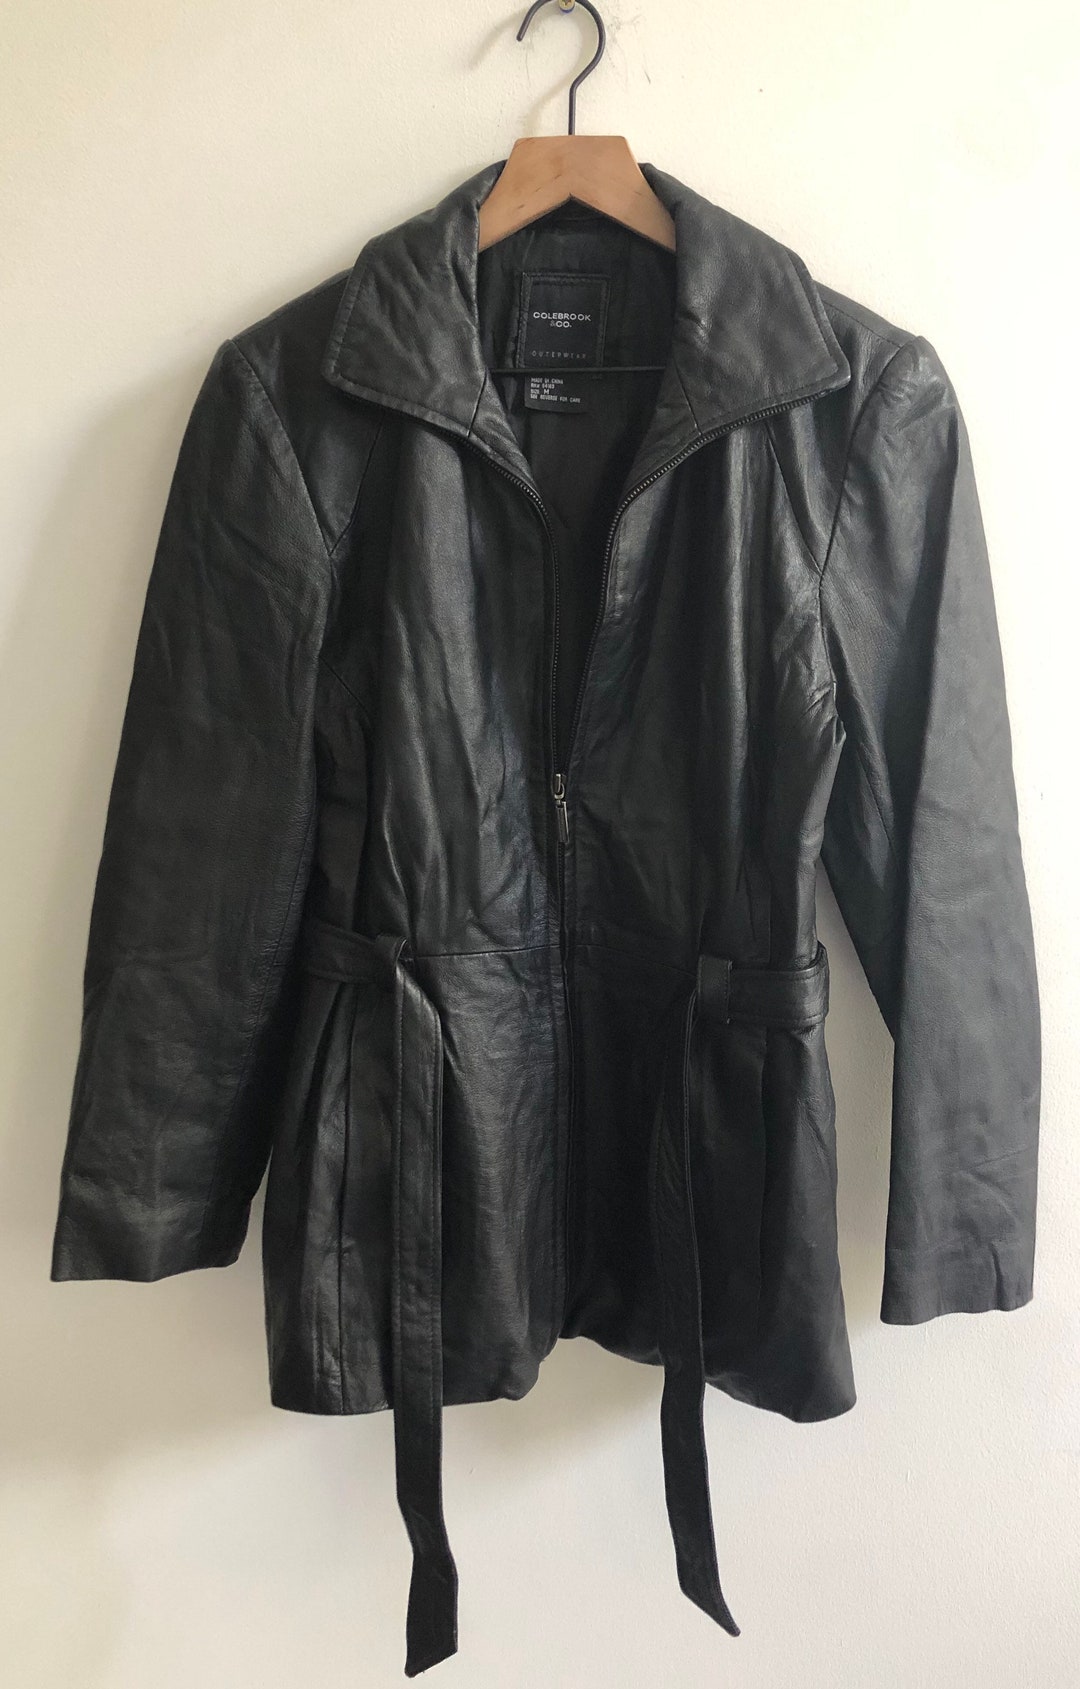 Colebrook and Co Genuine Leather Jacket Trench - Etsy